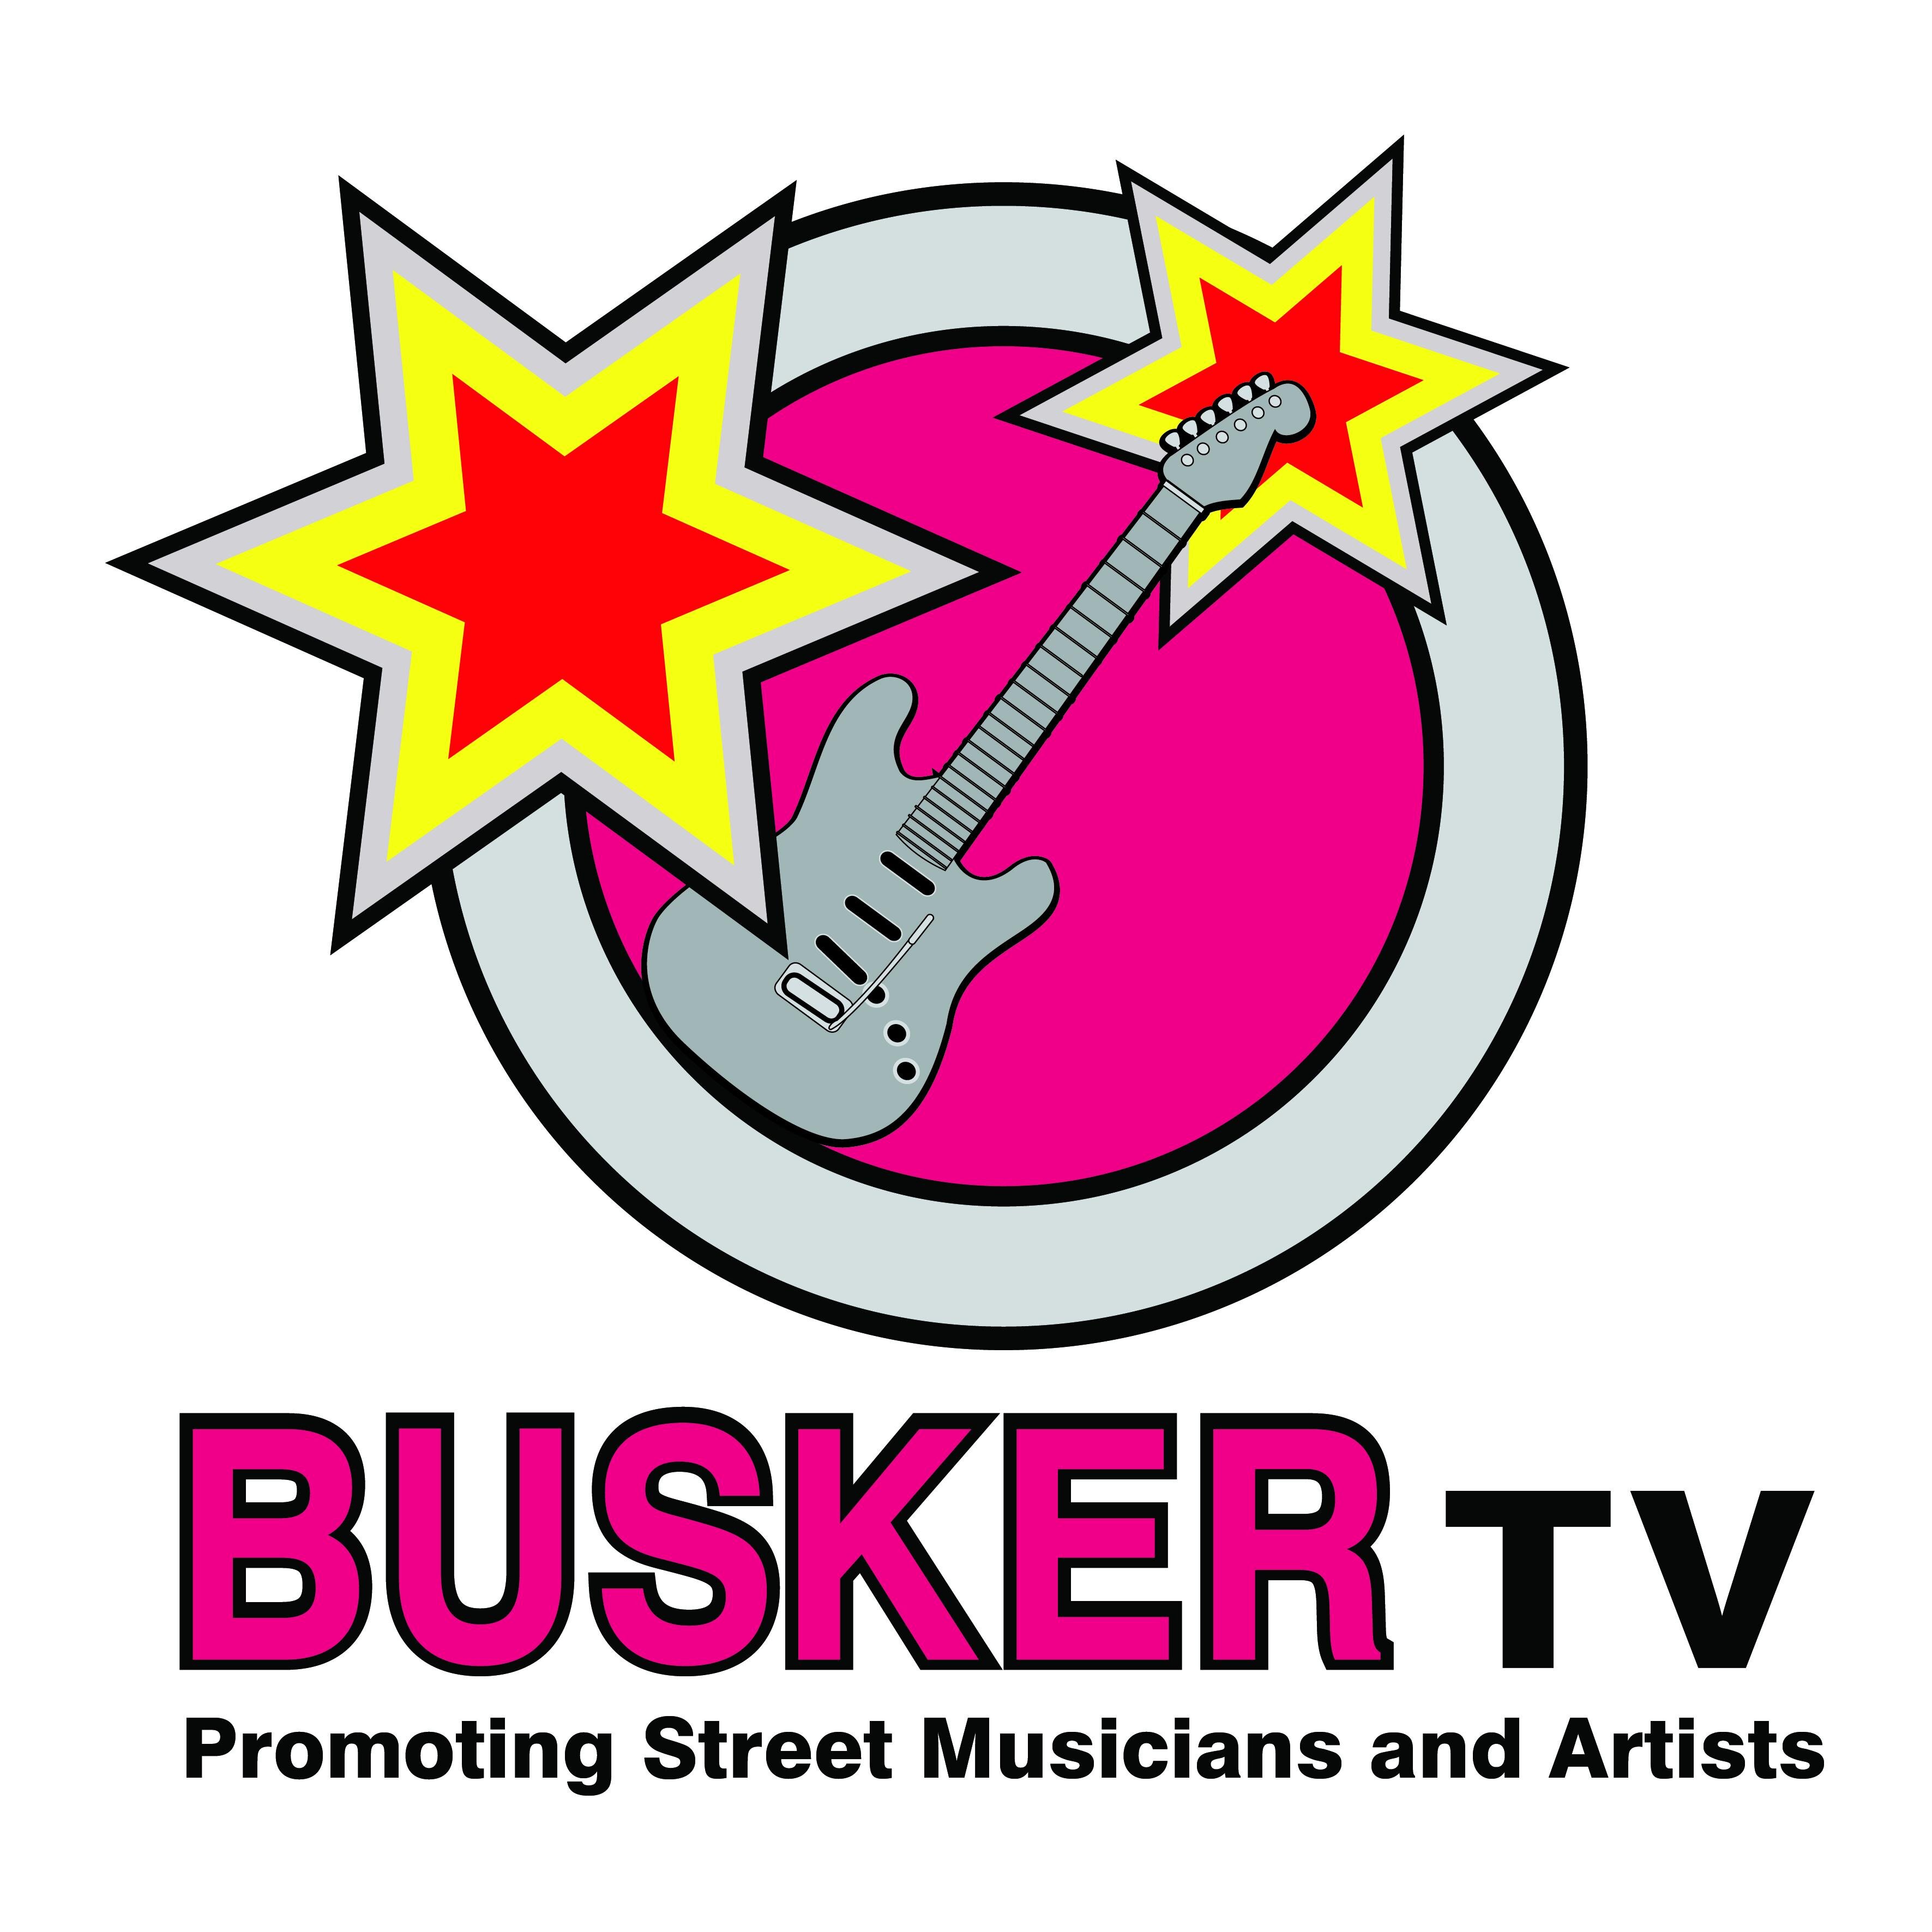 Internet Web TV channel, promoting street musicians, singer/songwriters, bands and artists from Ireland and around the world. email: buskertv@hotmail.com